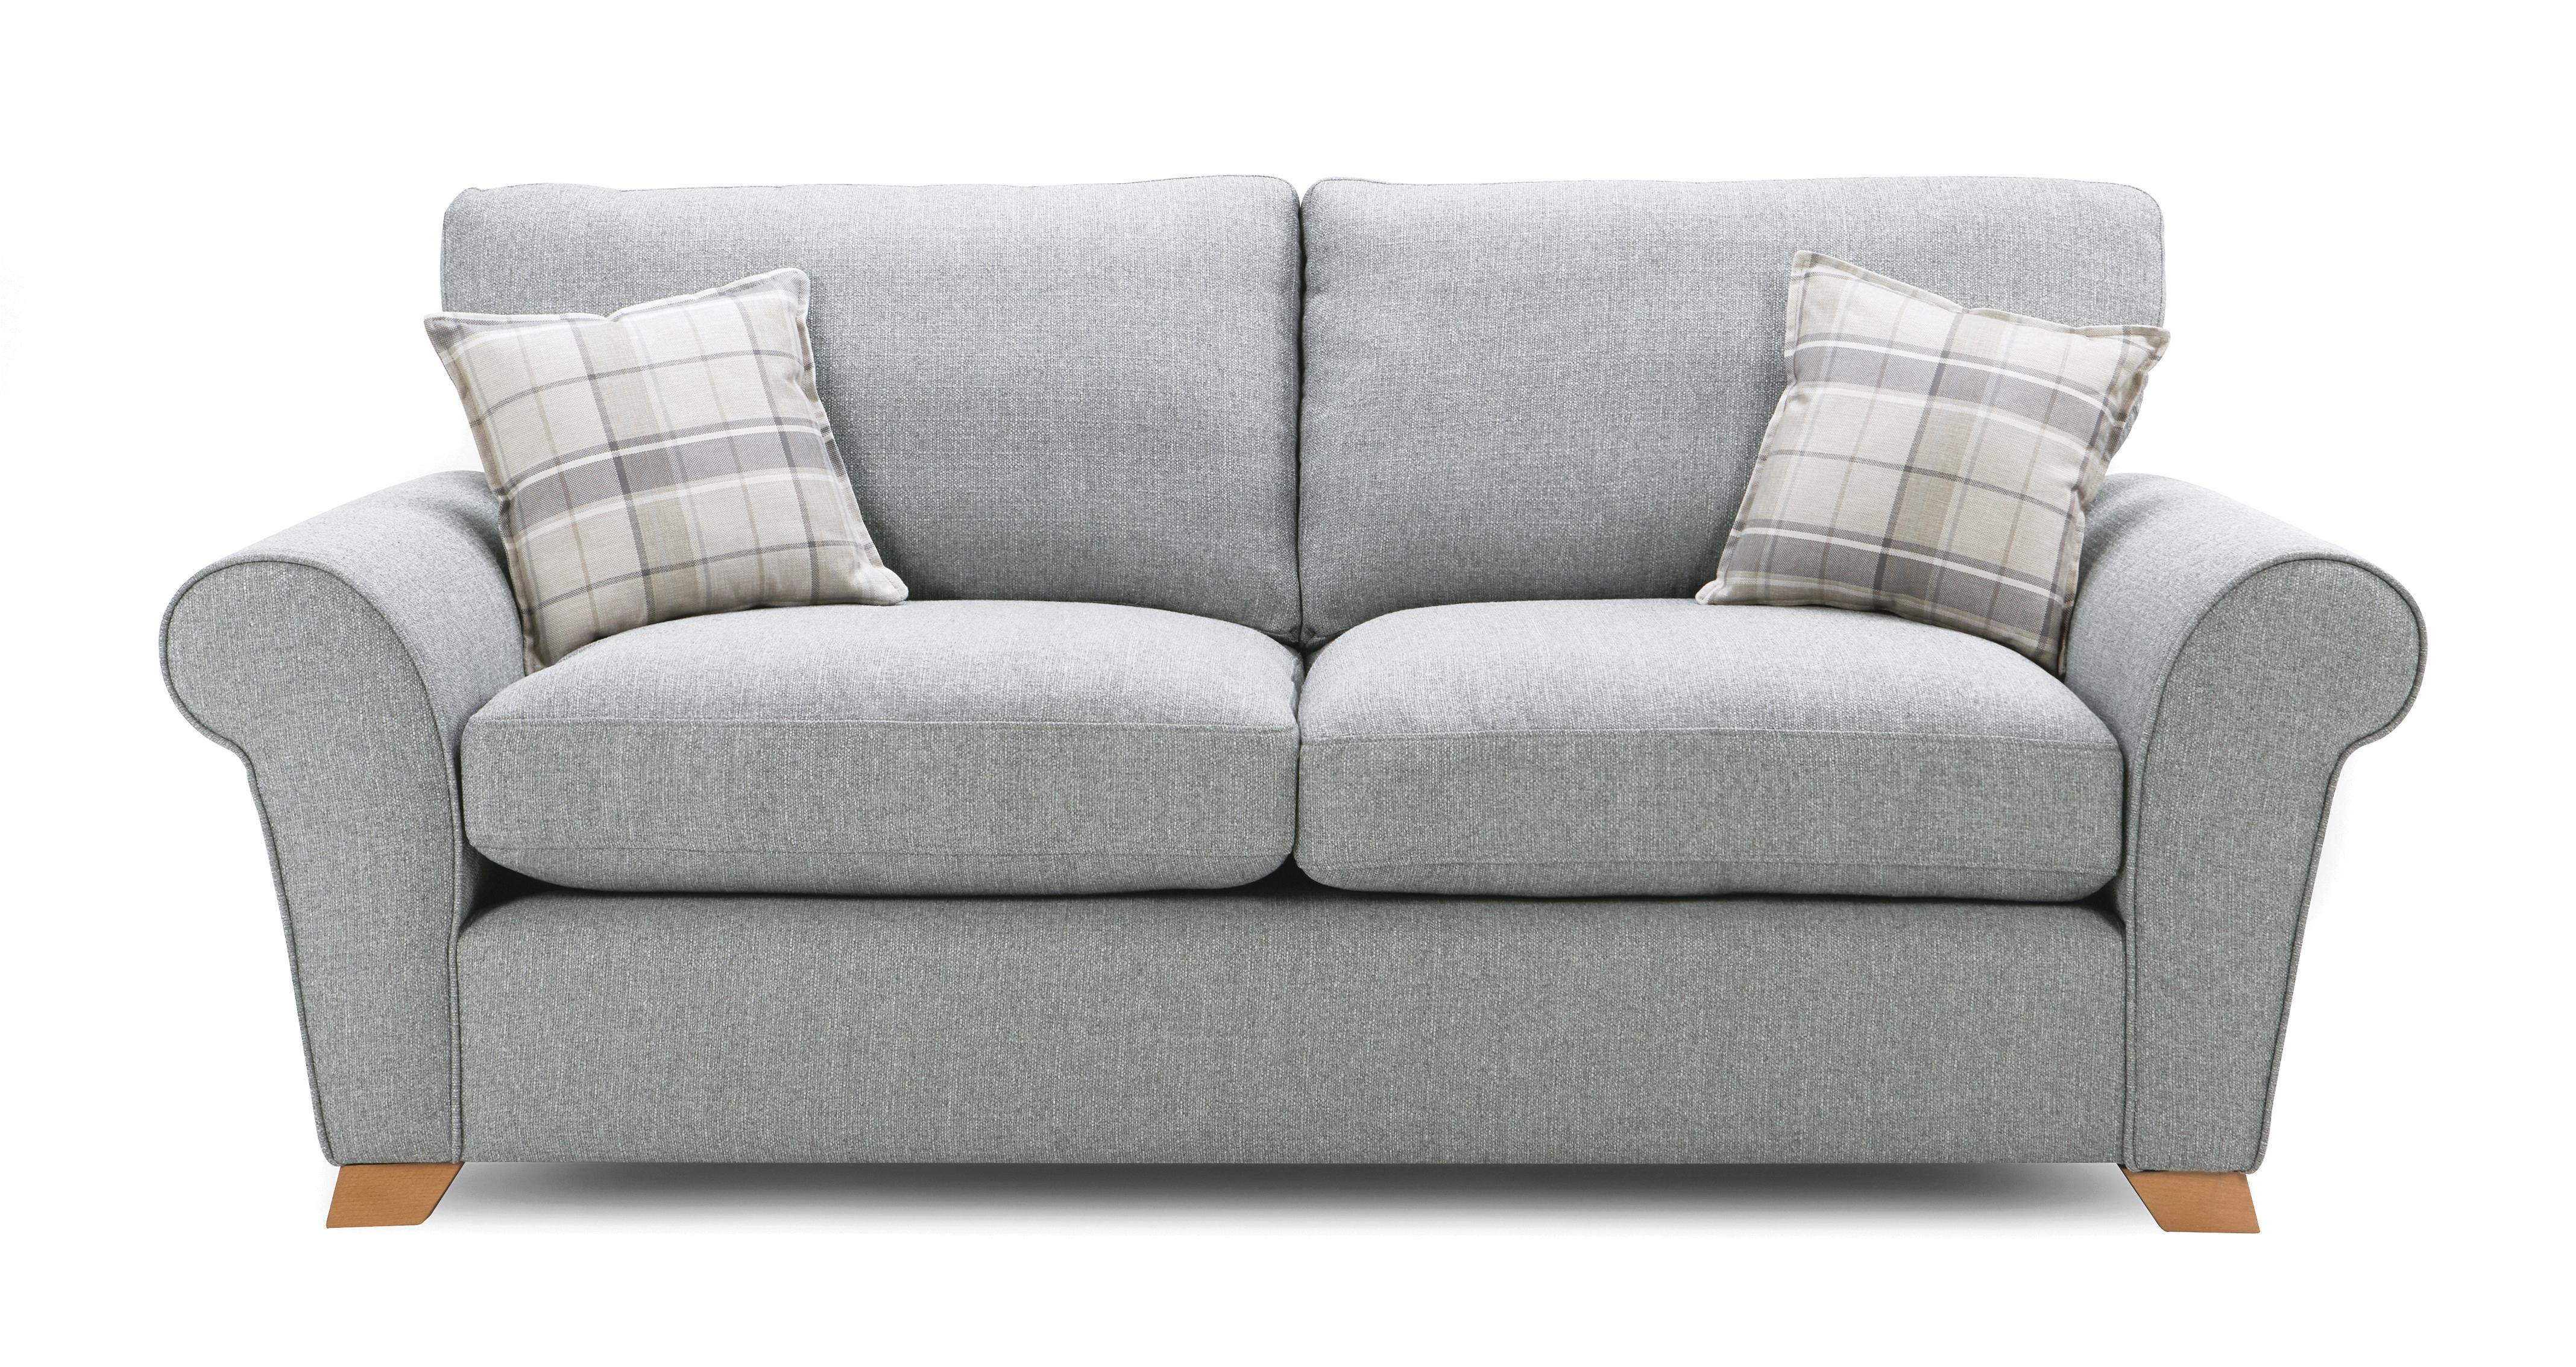 3 seater sofa beds for sale